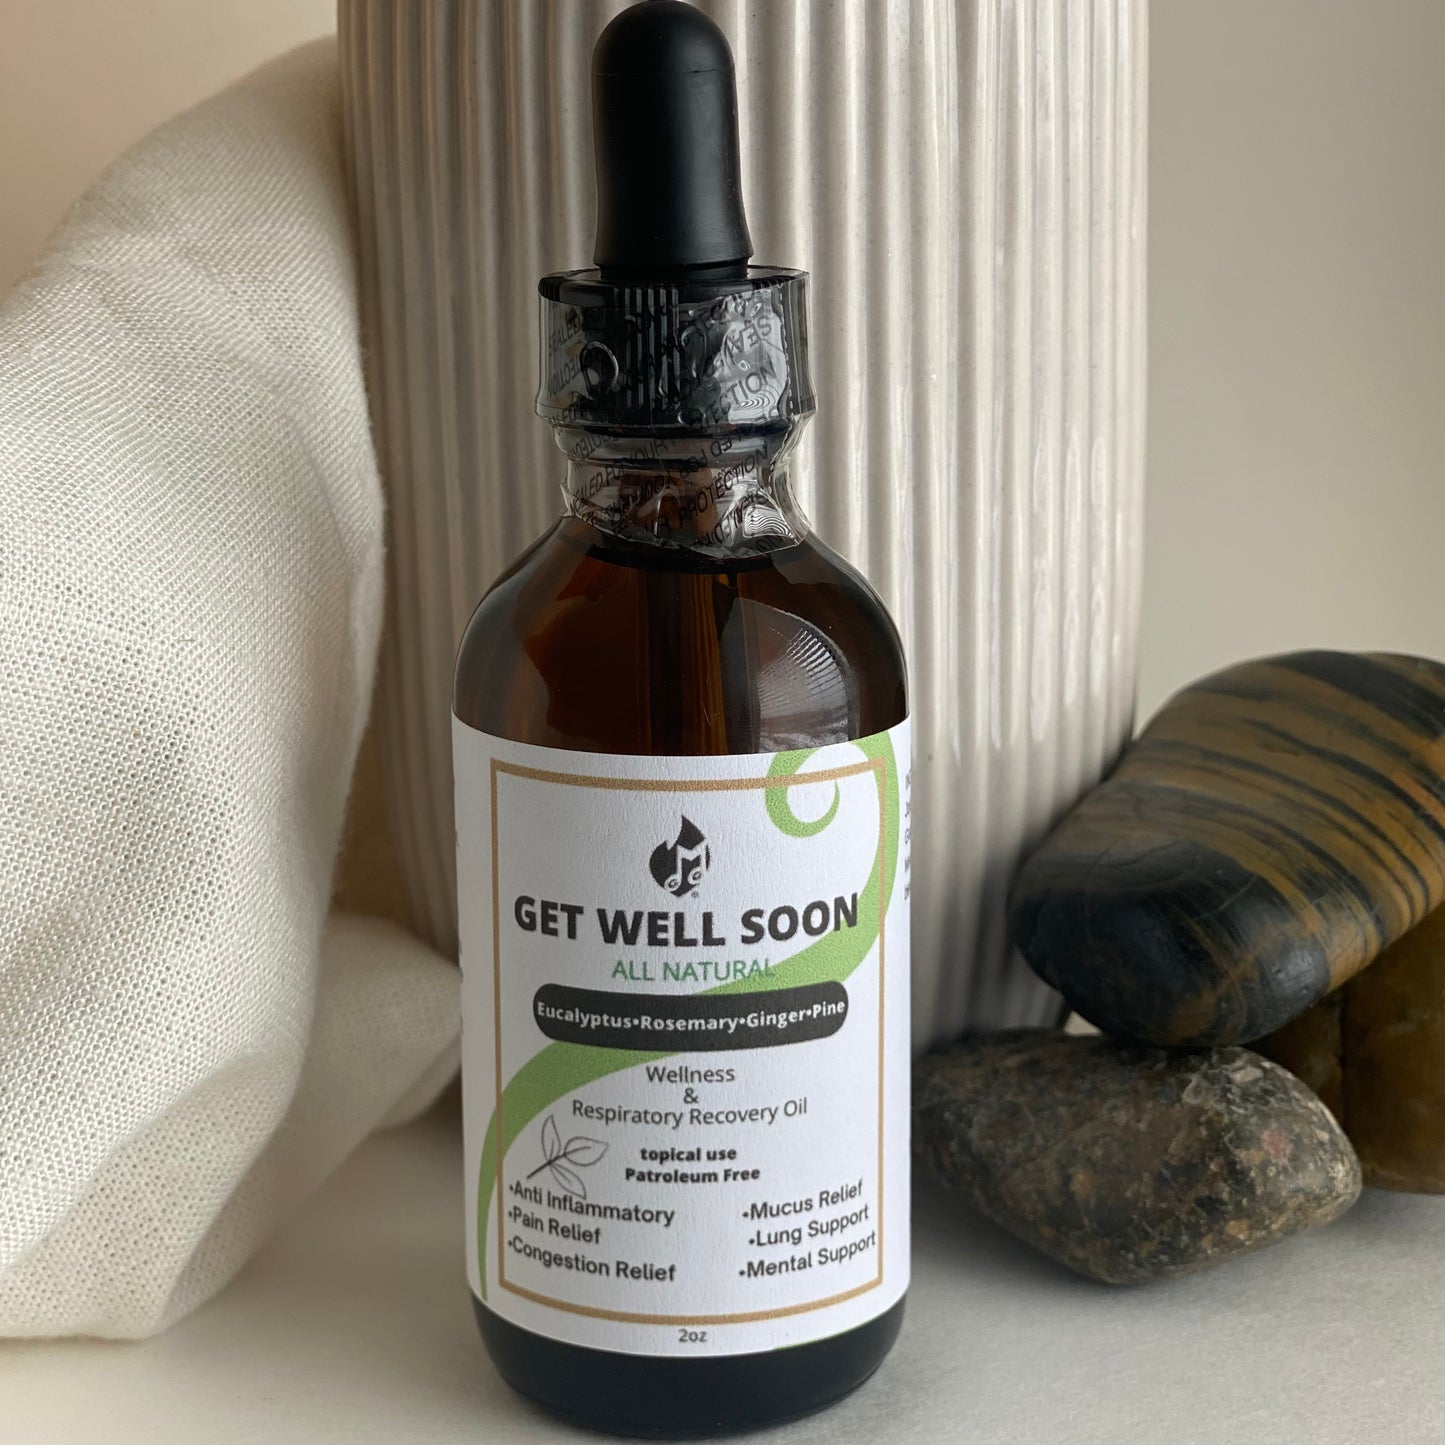 GET WELL SOON wellness, pain & respiratory recovery oil